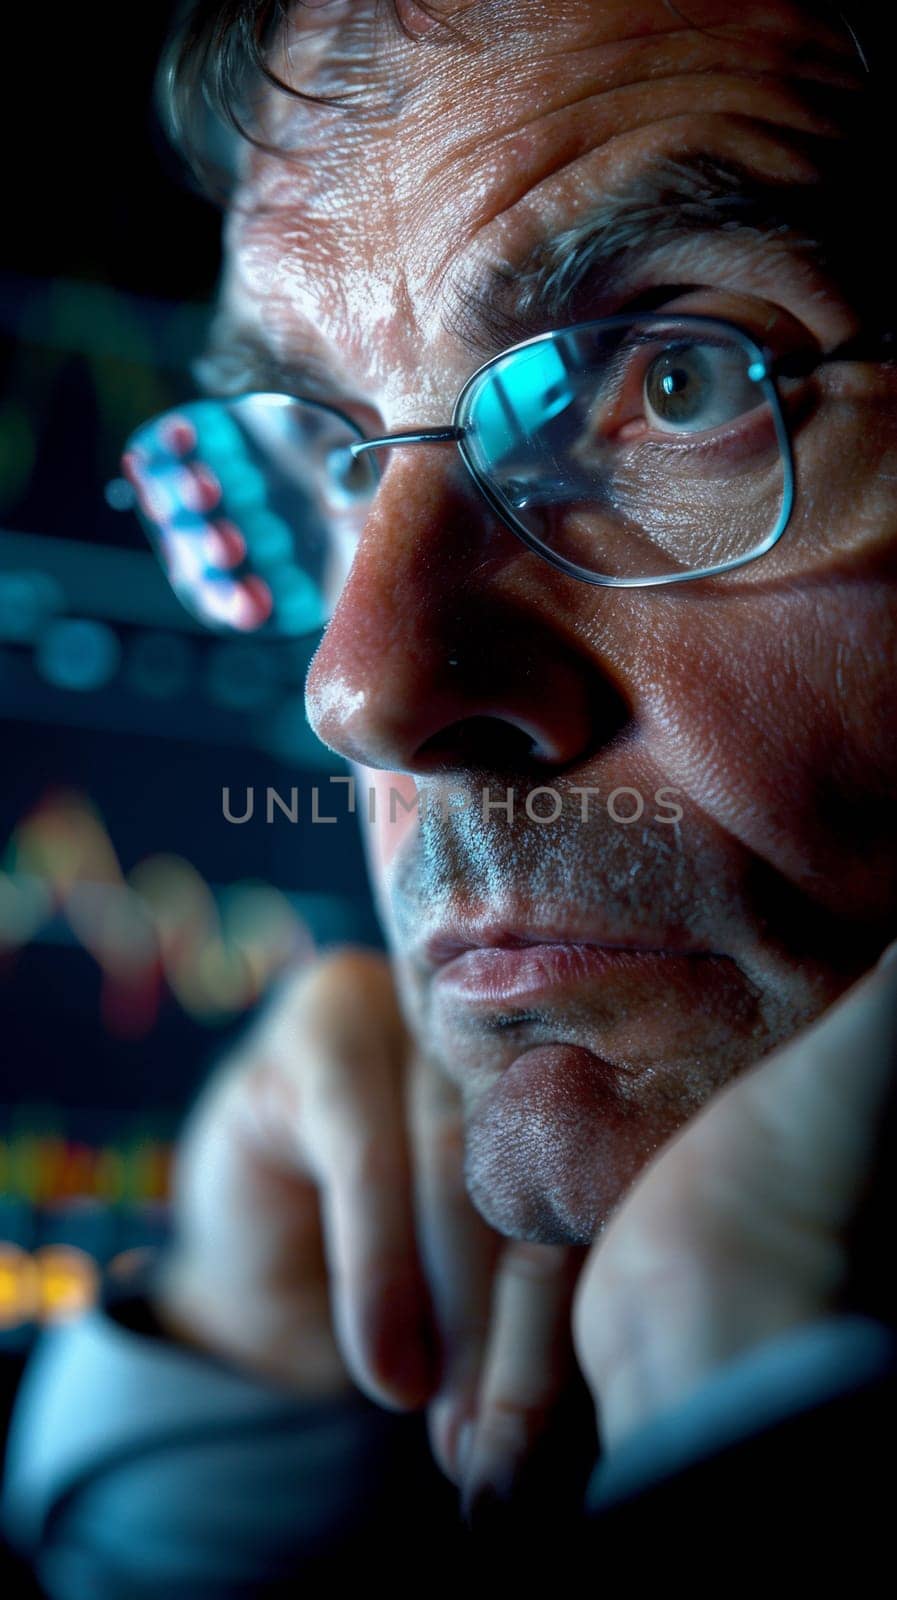 A man with glasses looking at a screen in front of him